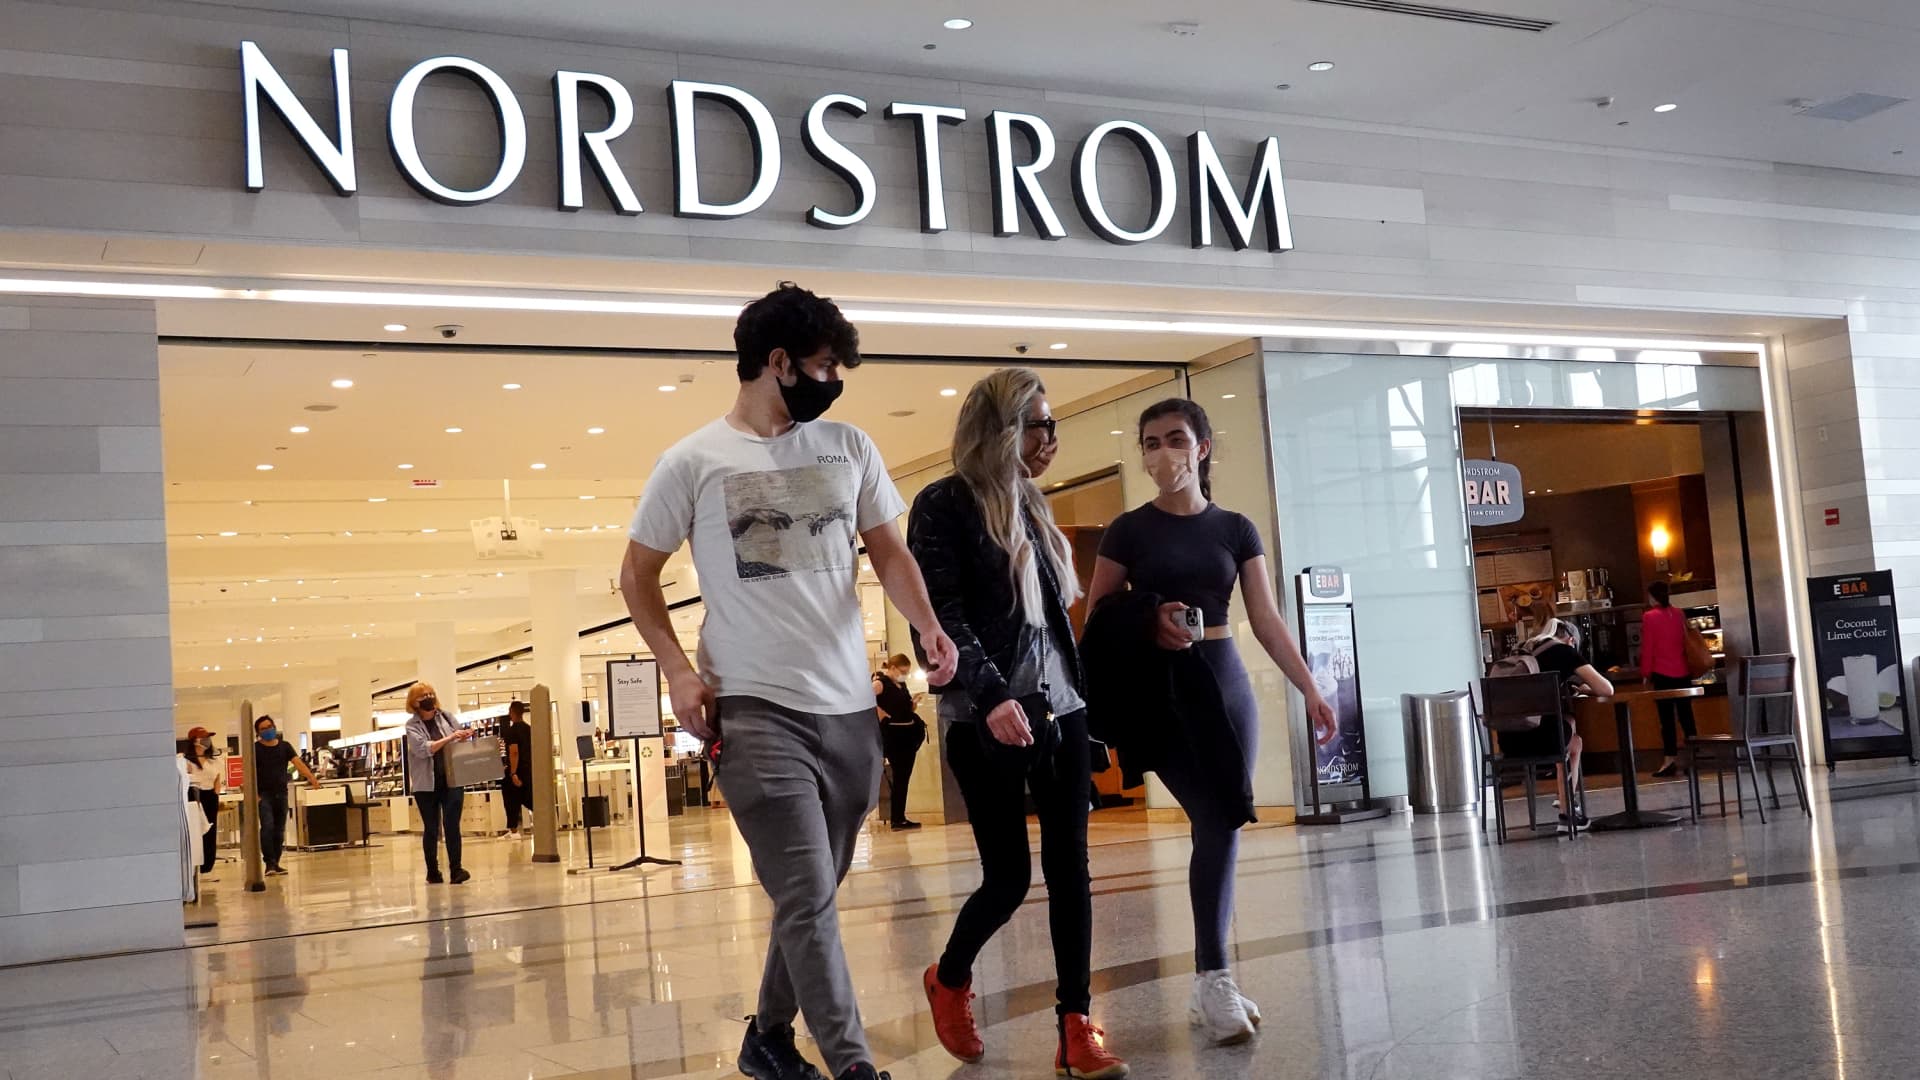 Nordstrom (JWN) reports results for Q2 2022